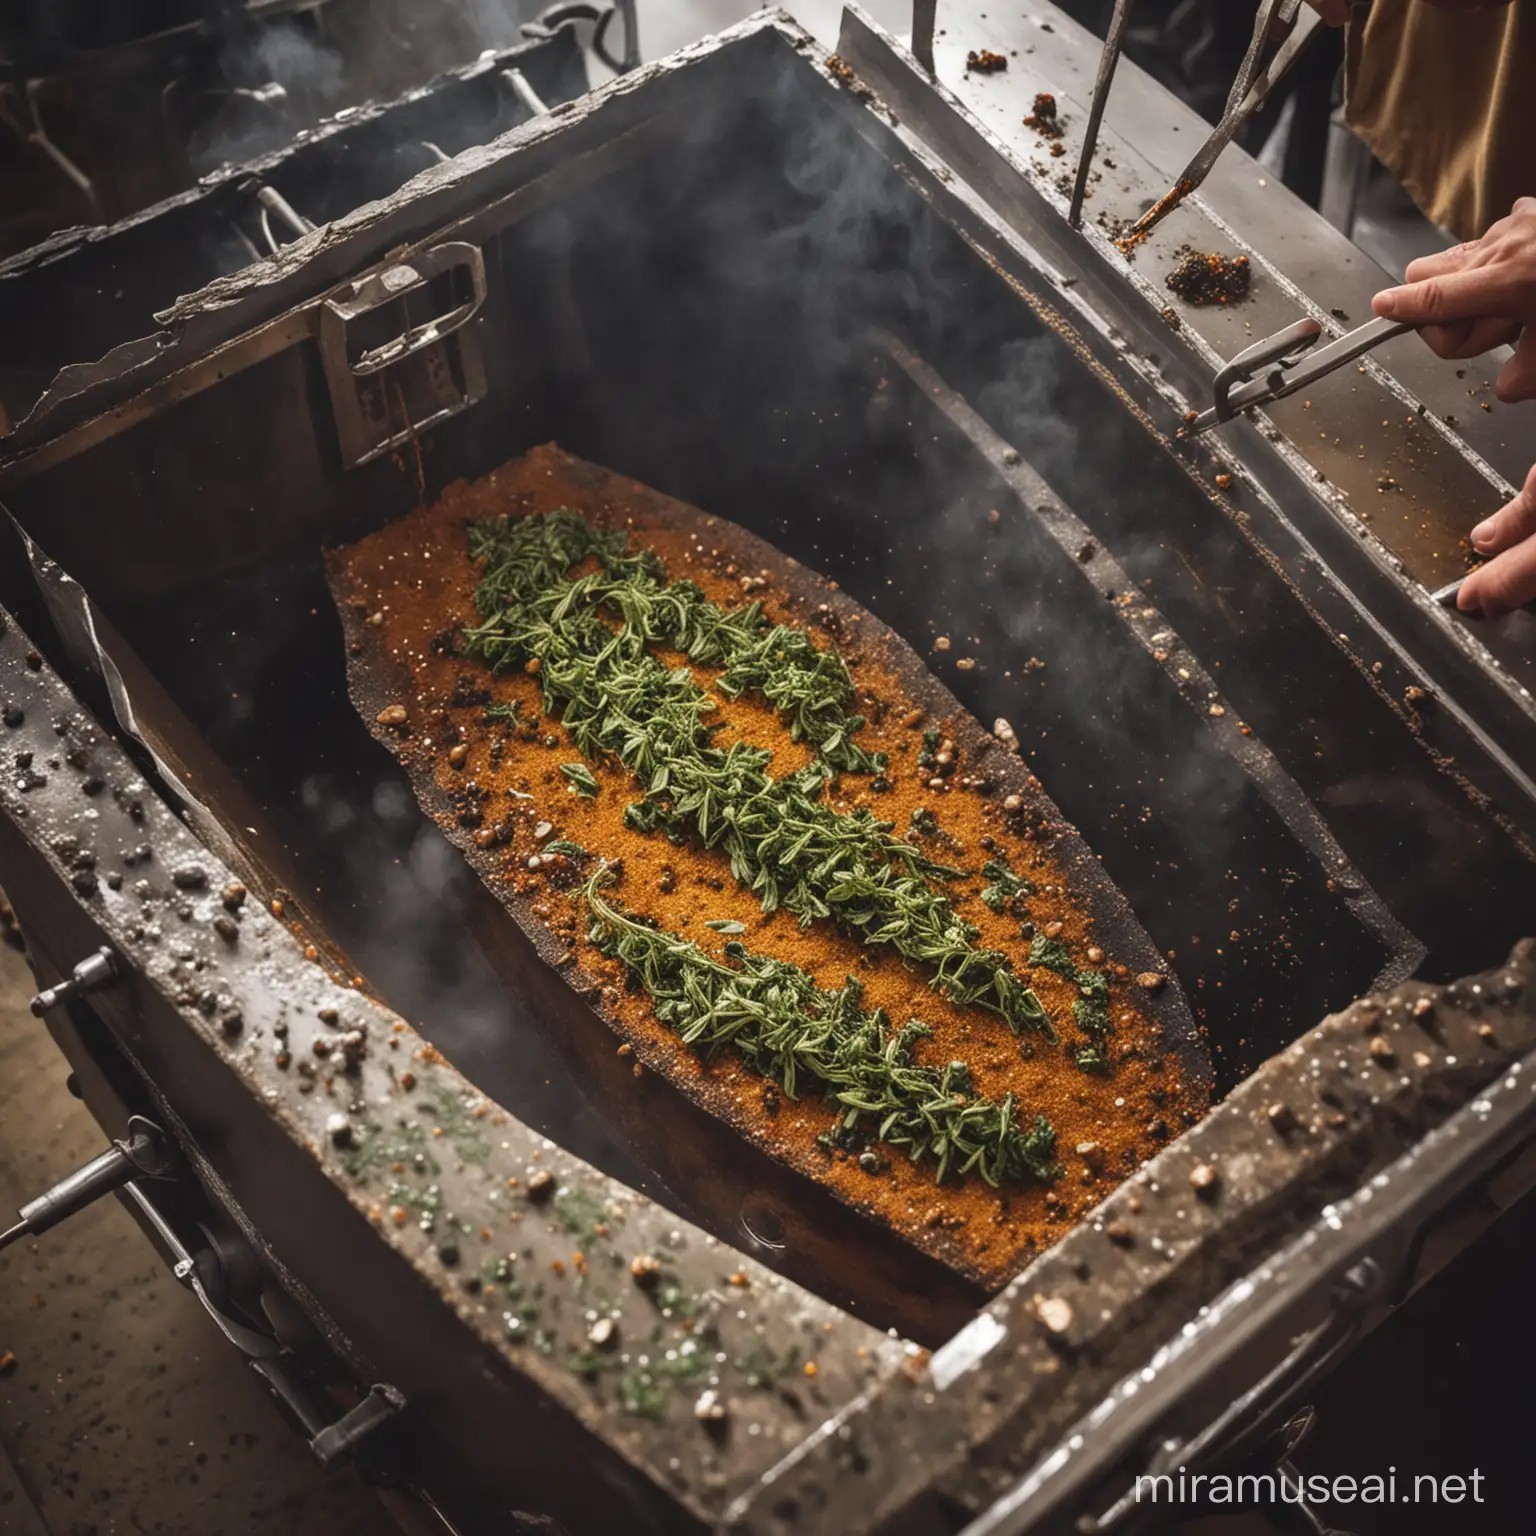 A coffin sprinkled with a secret blend of herbs and spices, being slowly lowered into a deep fat fryer.